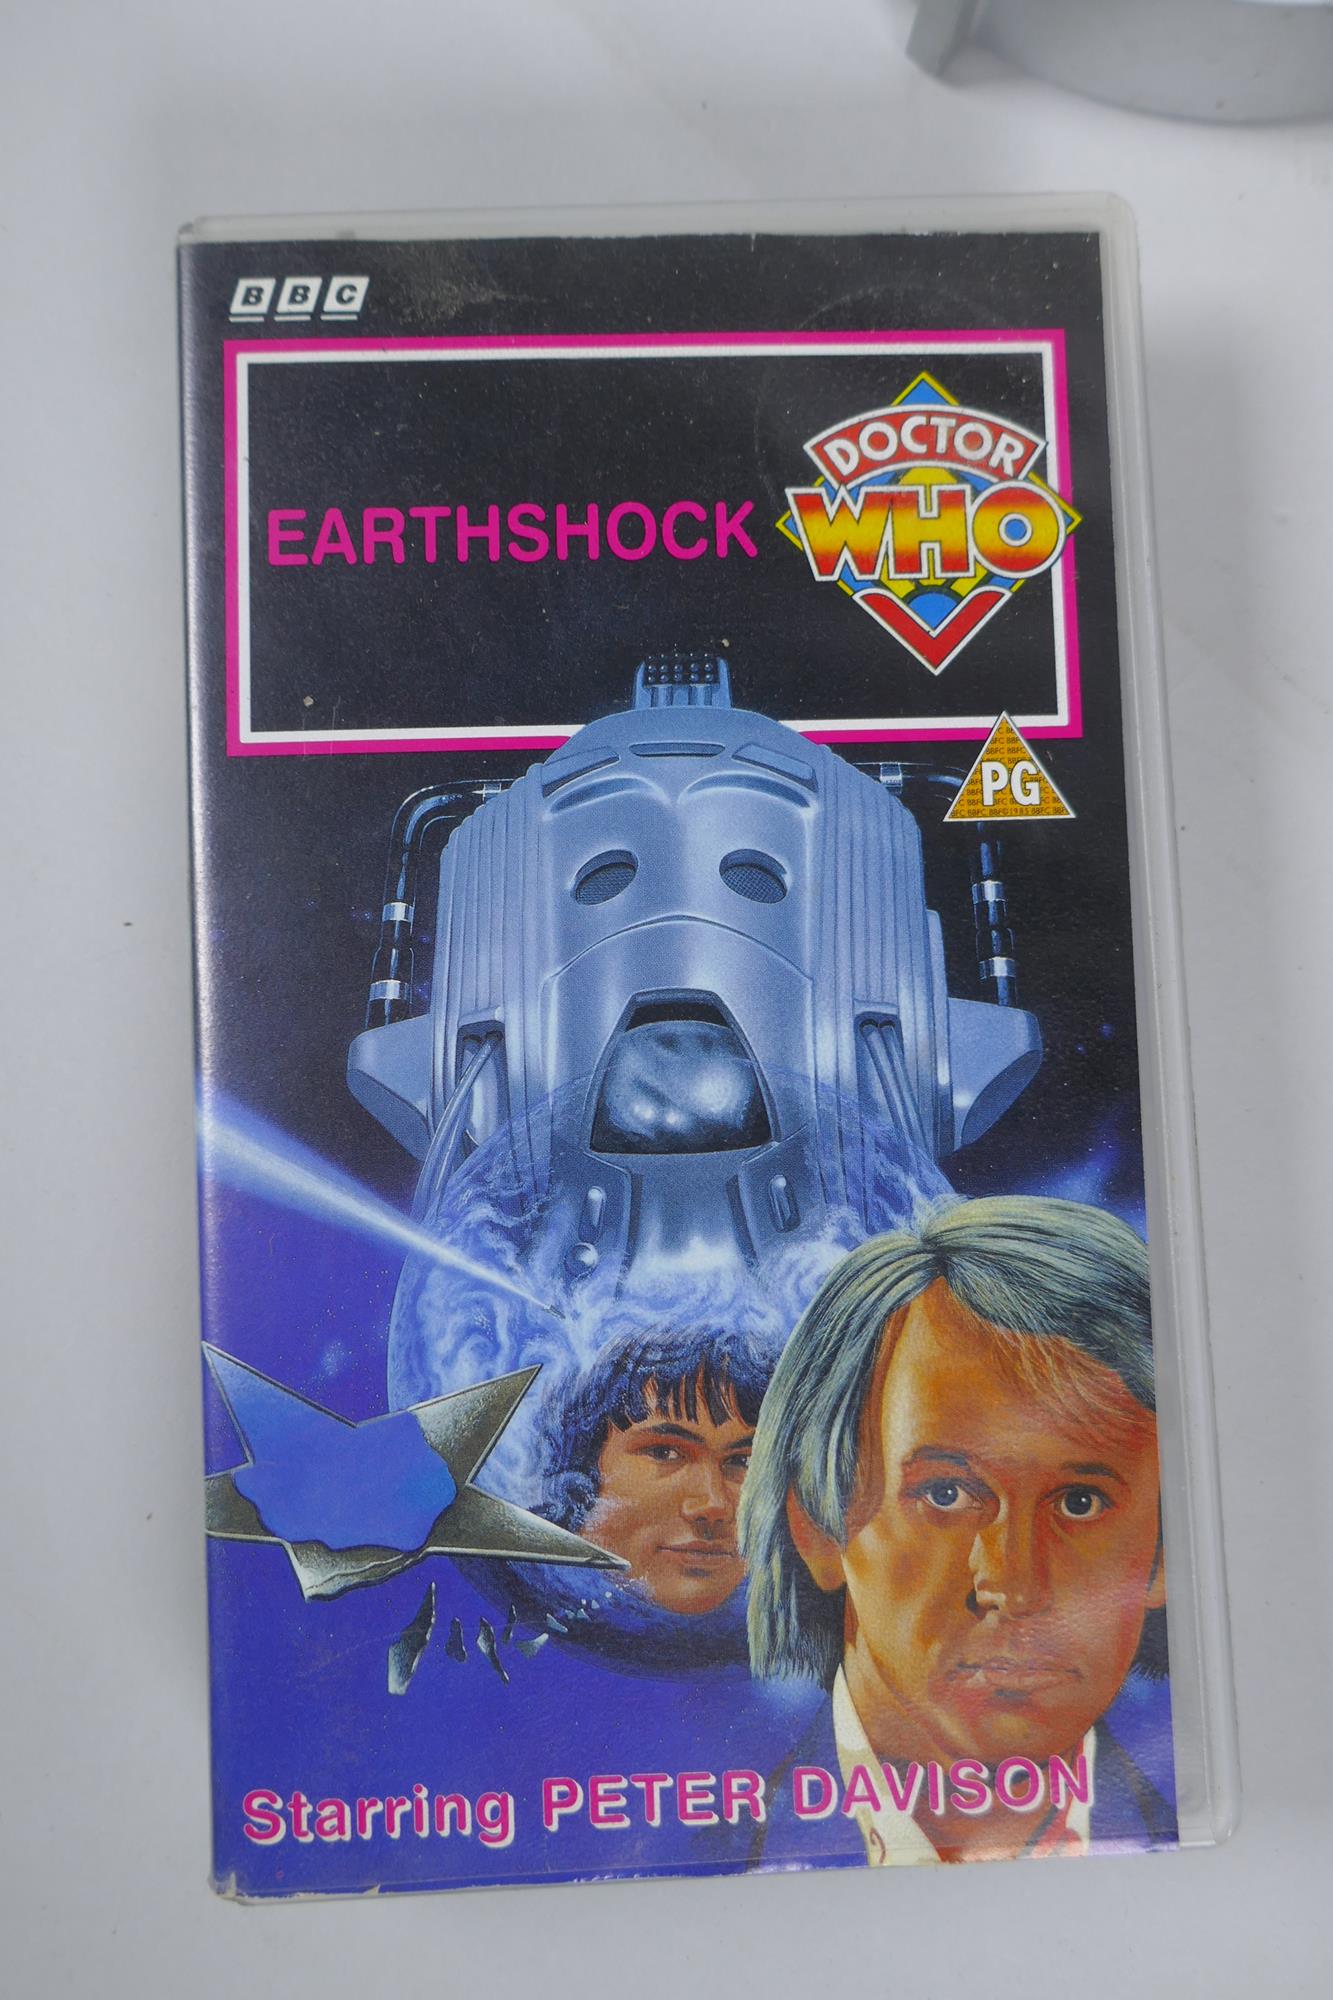 A quantity of Dr Who collectors' items, to include toy Daleks and Cybermen, moneybox, Earthshock VHS - Image 7 of 8